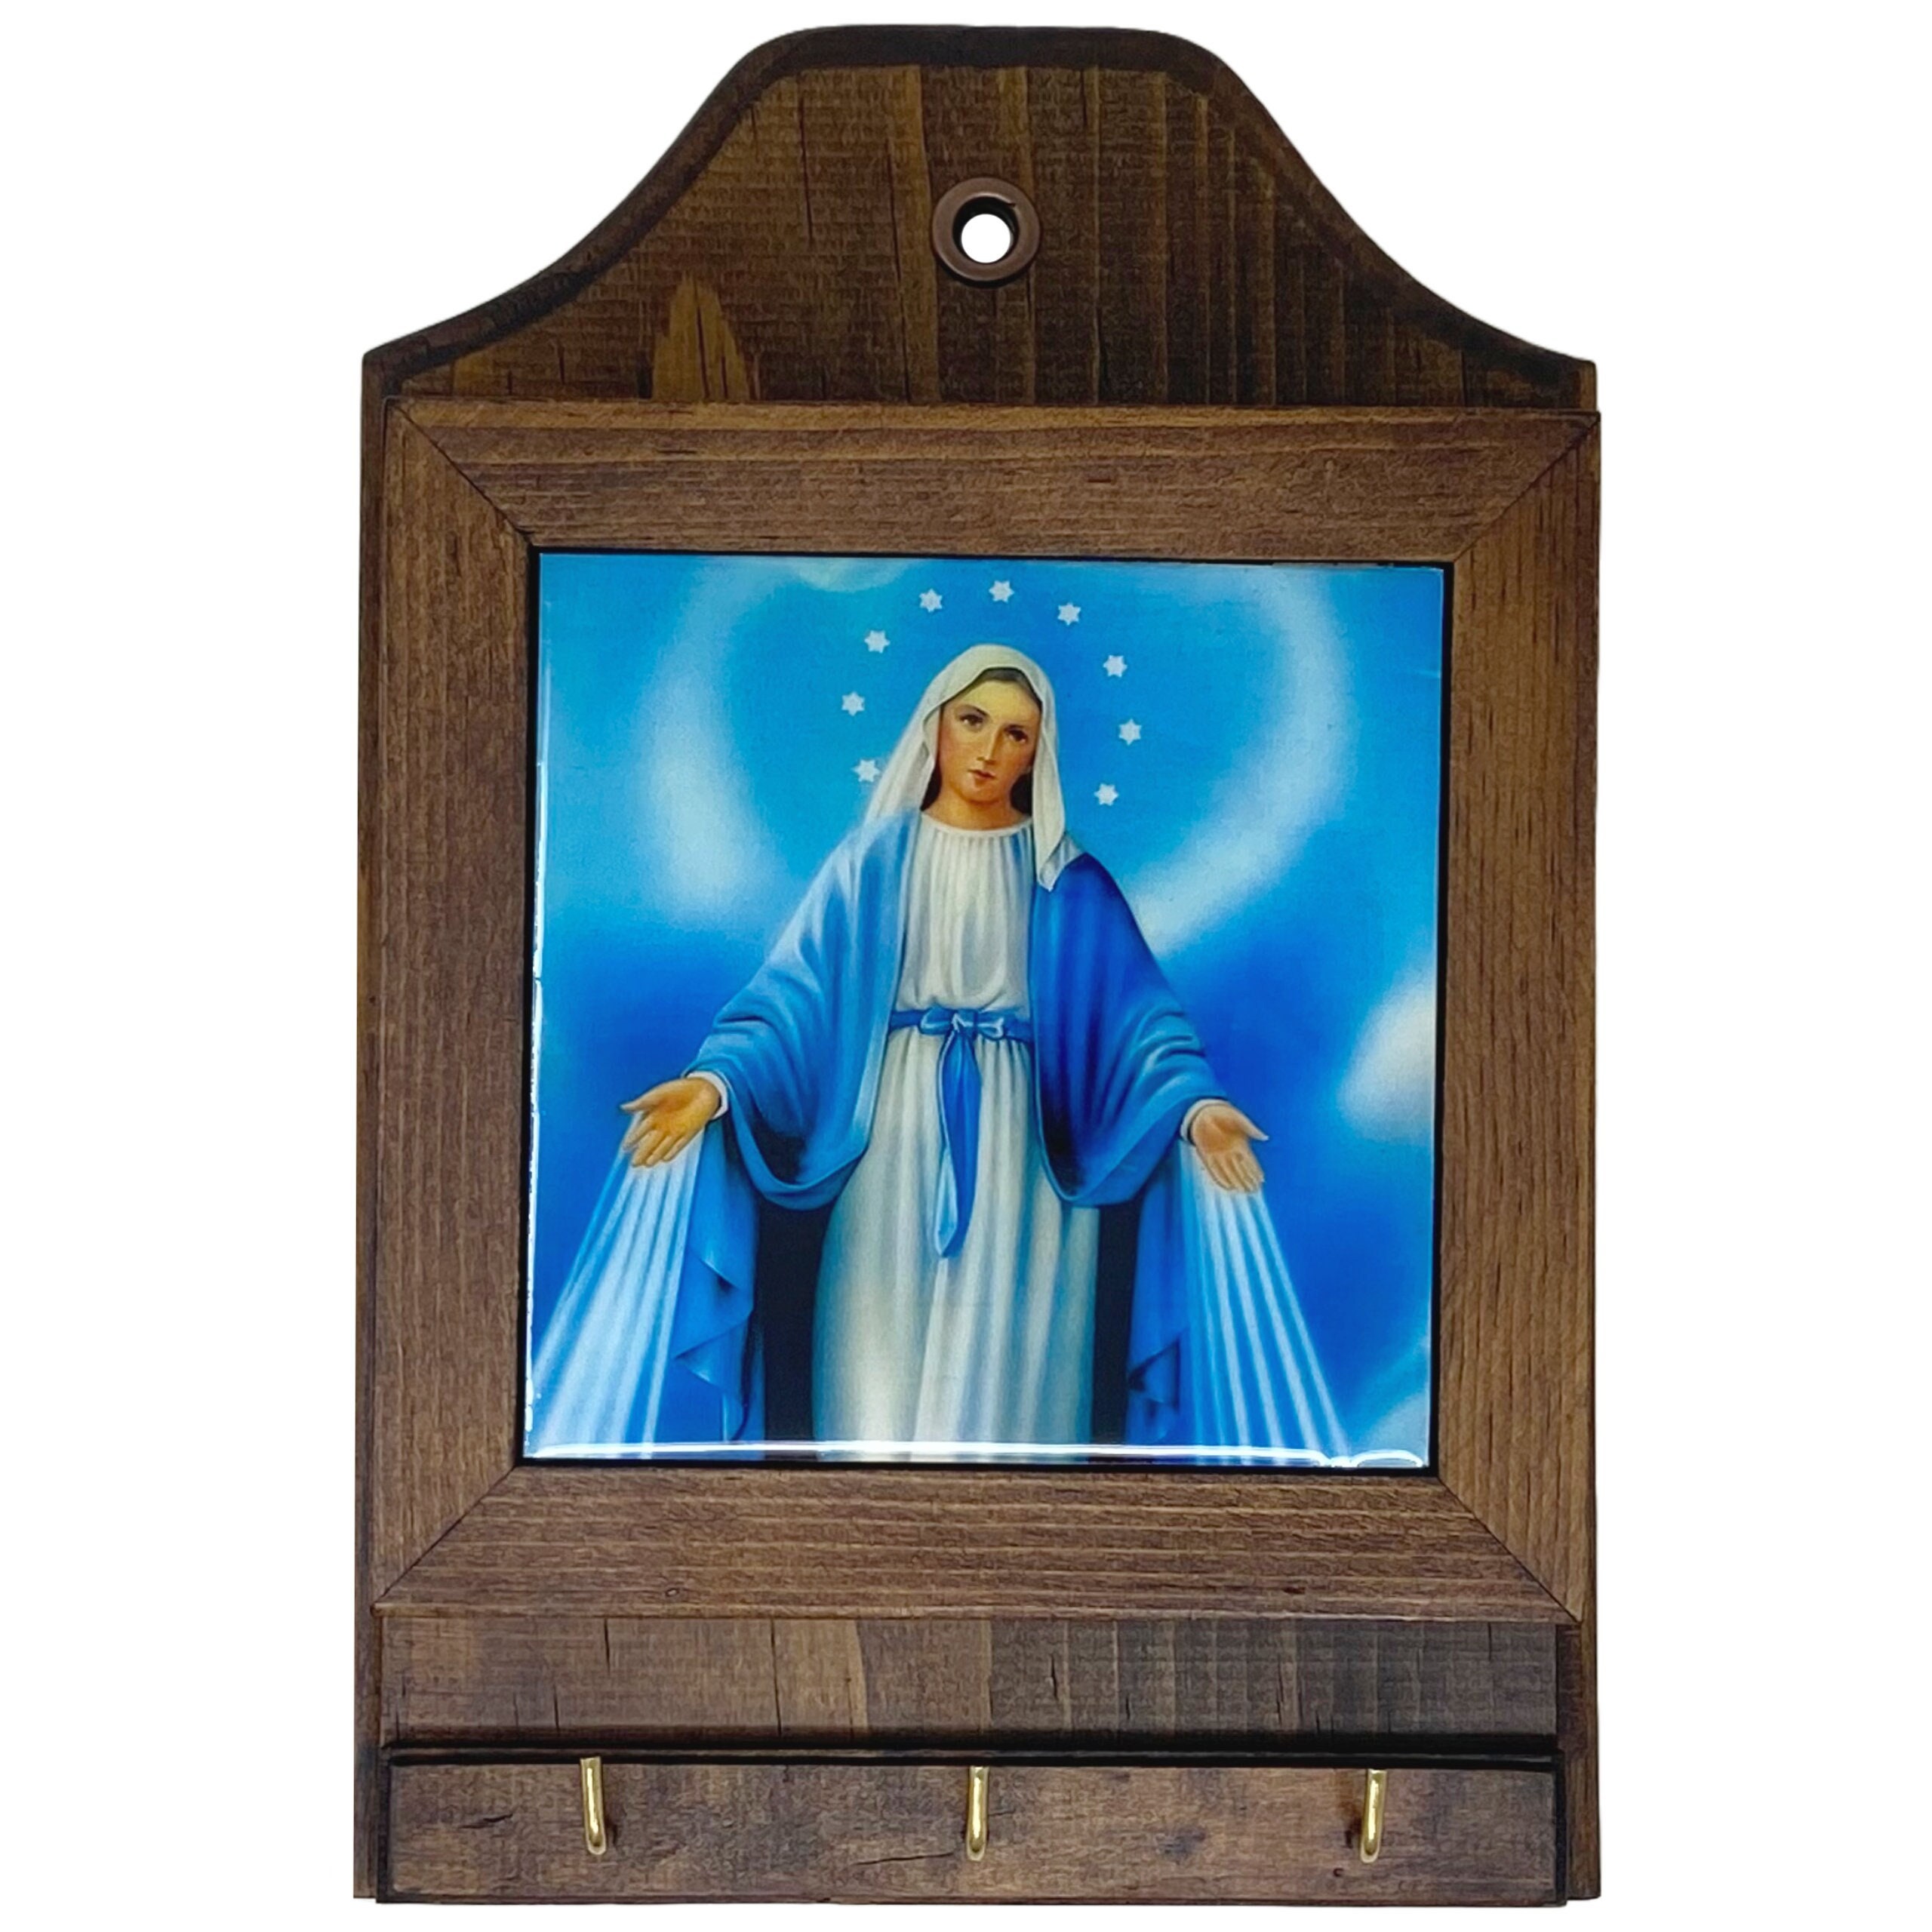 Nuestra Señora de la Medalla Milagrosa  Blessed mother mary, Virgin mary  statue, Blessed mother